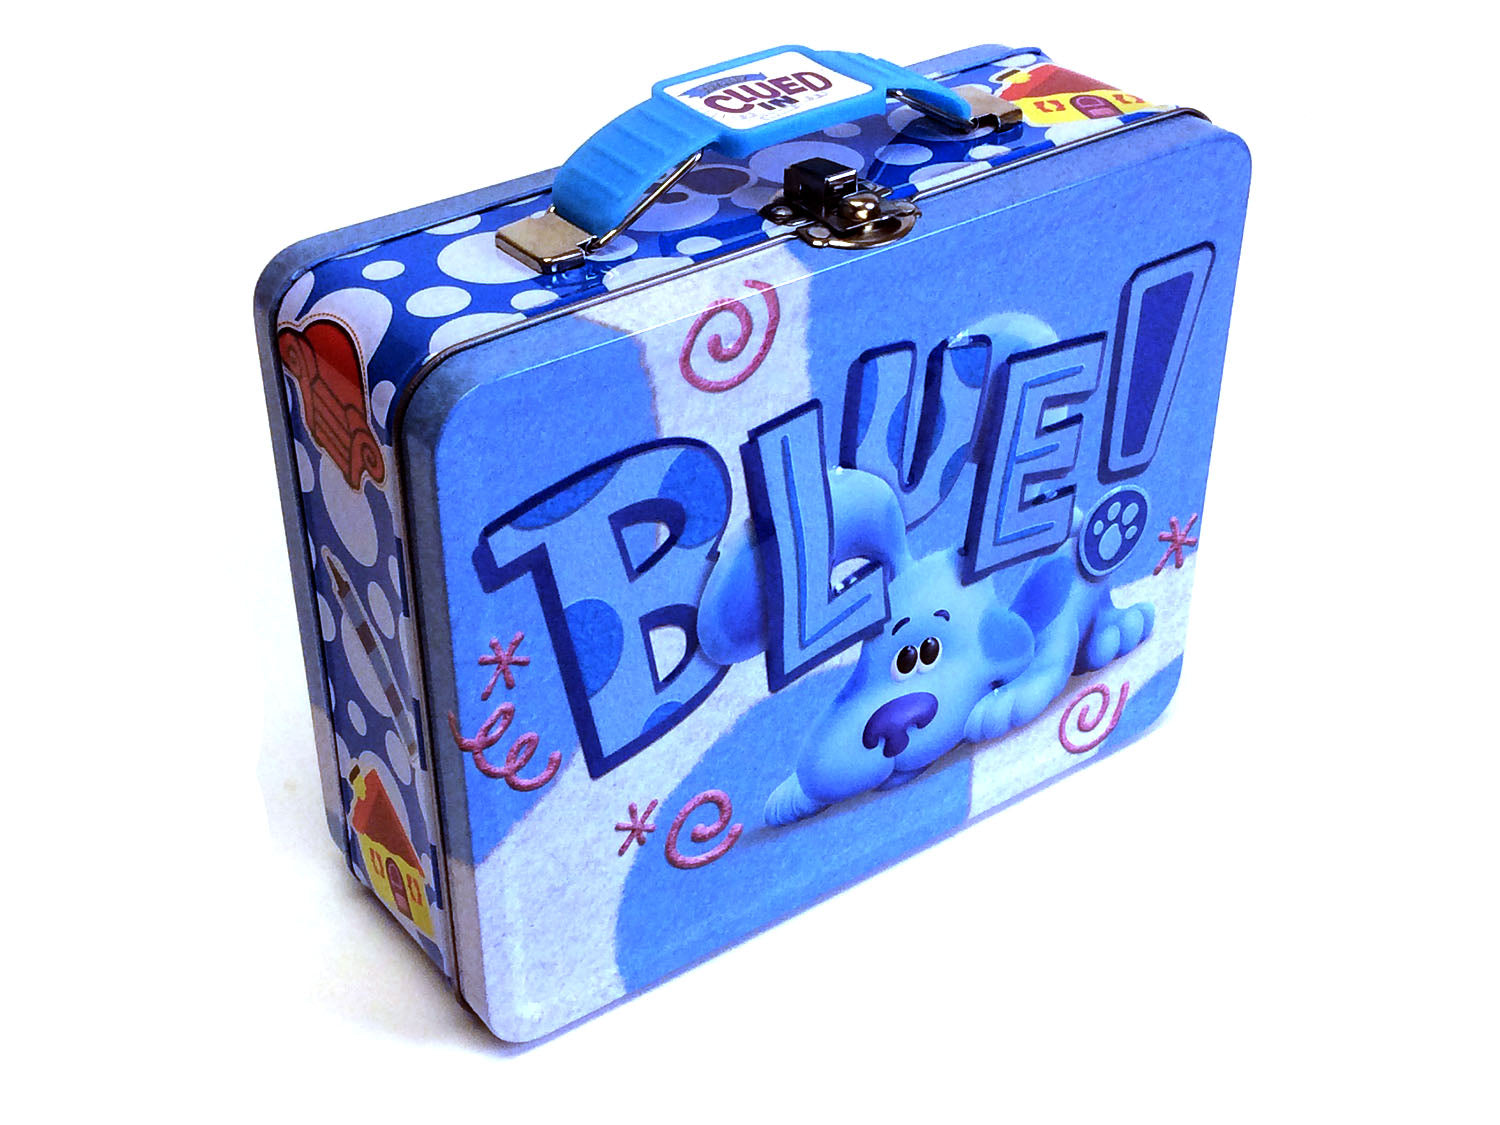 Nickelodeon Blue's Clues & You Girls Boys Soft Insulated School Lunch Box (One size, Blue)